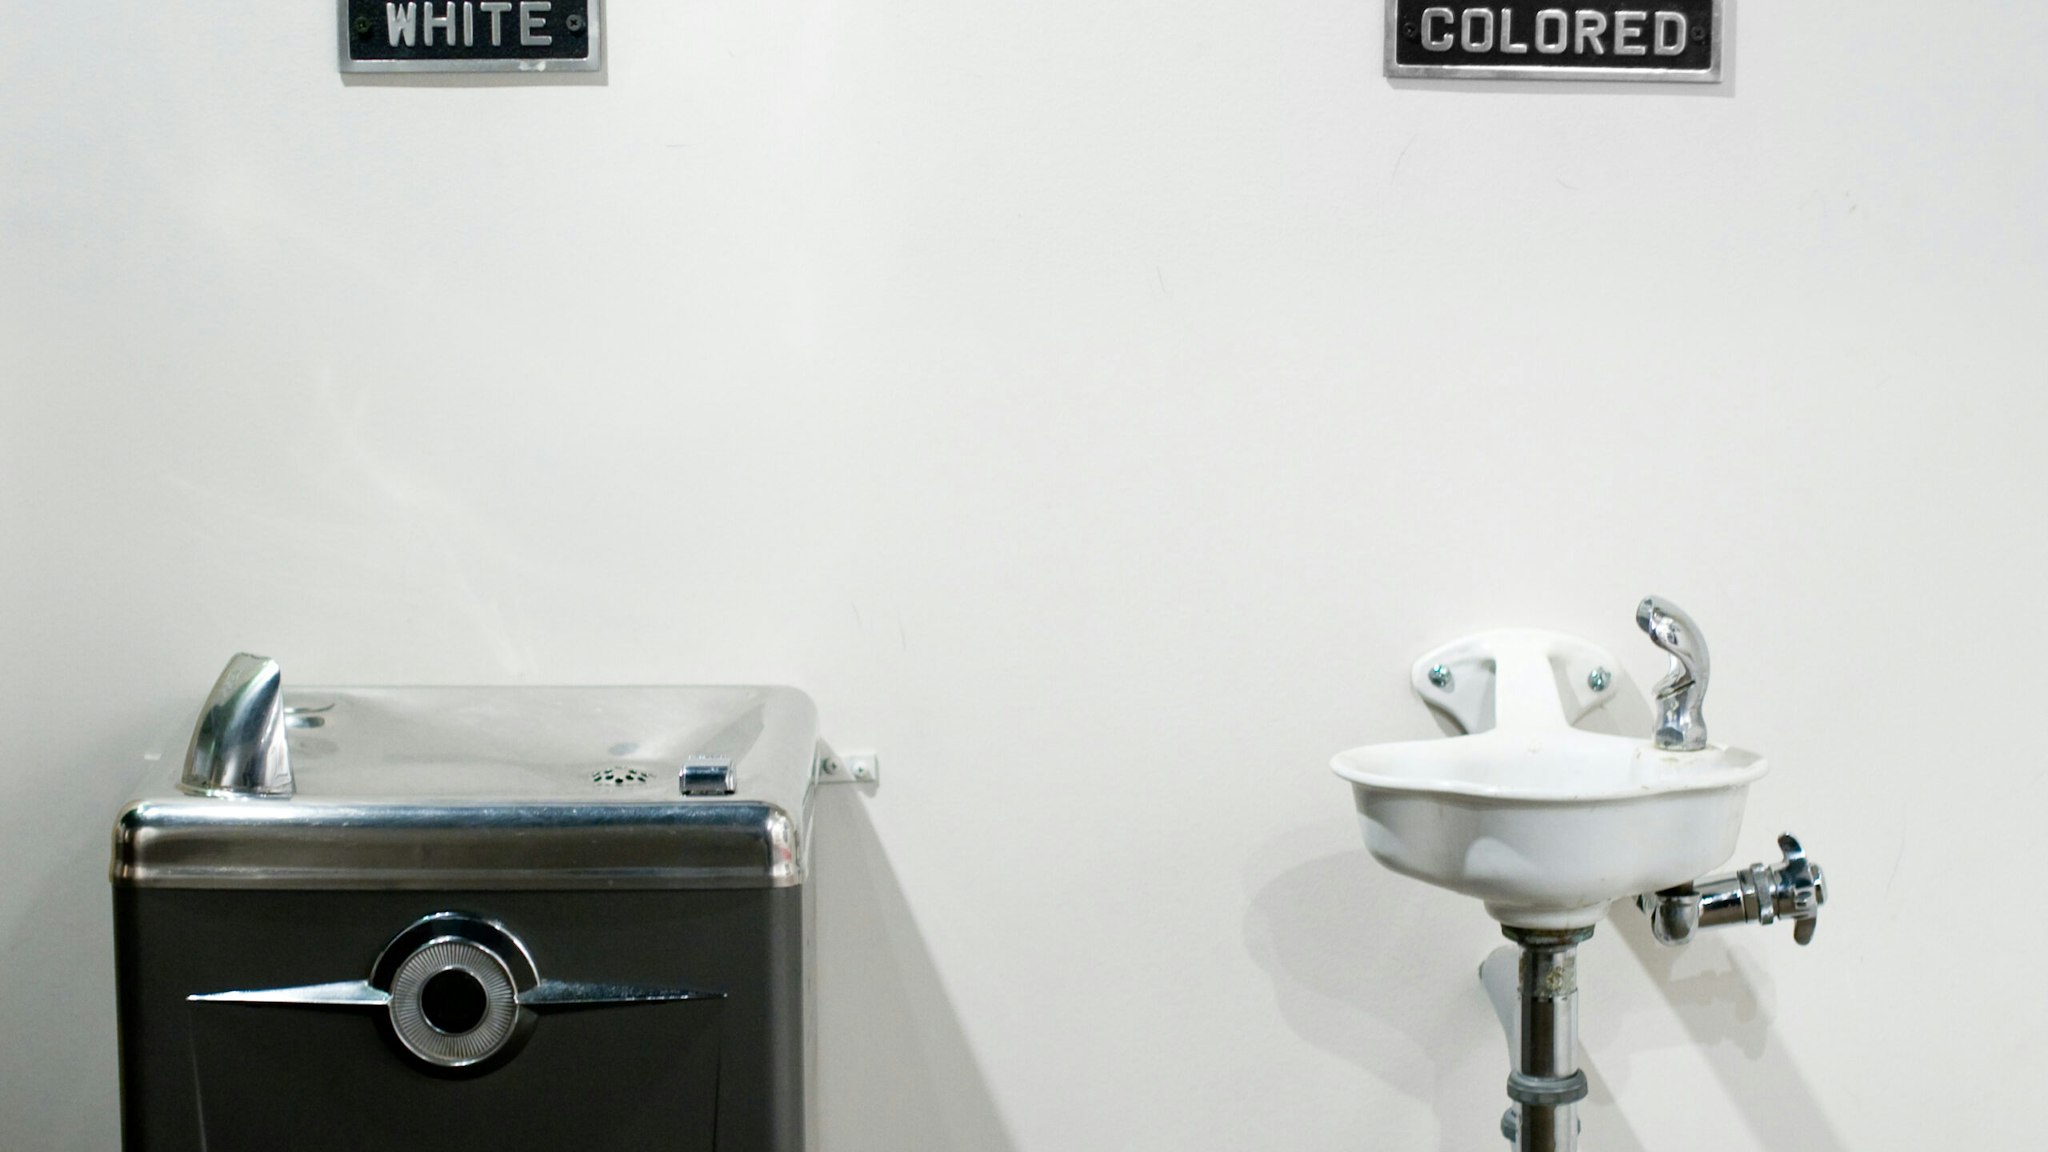 Segregated water fountains - stock photo